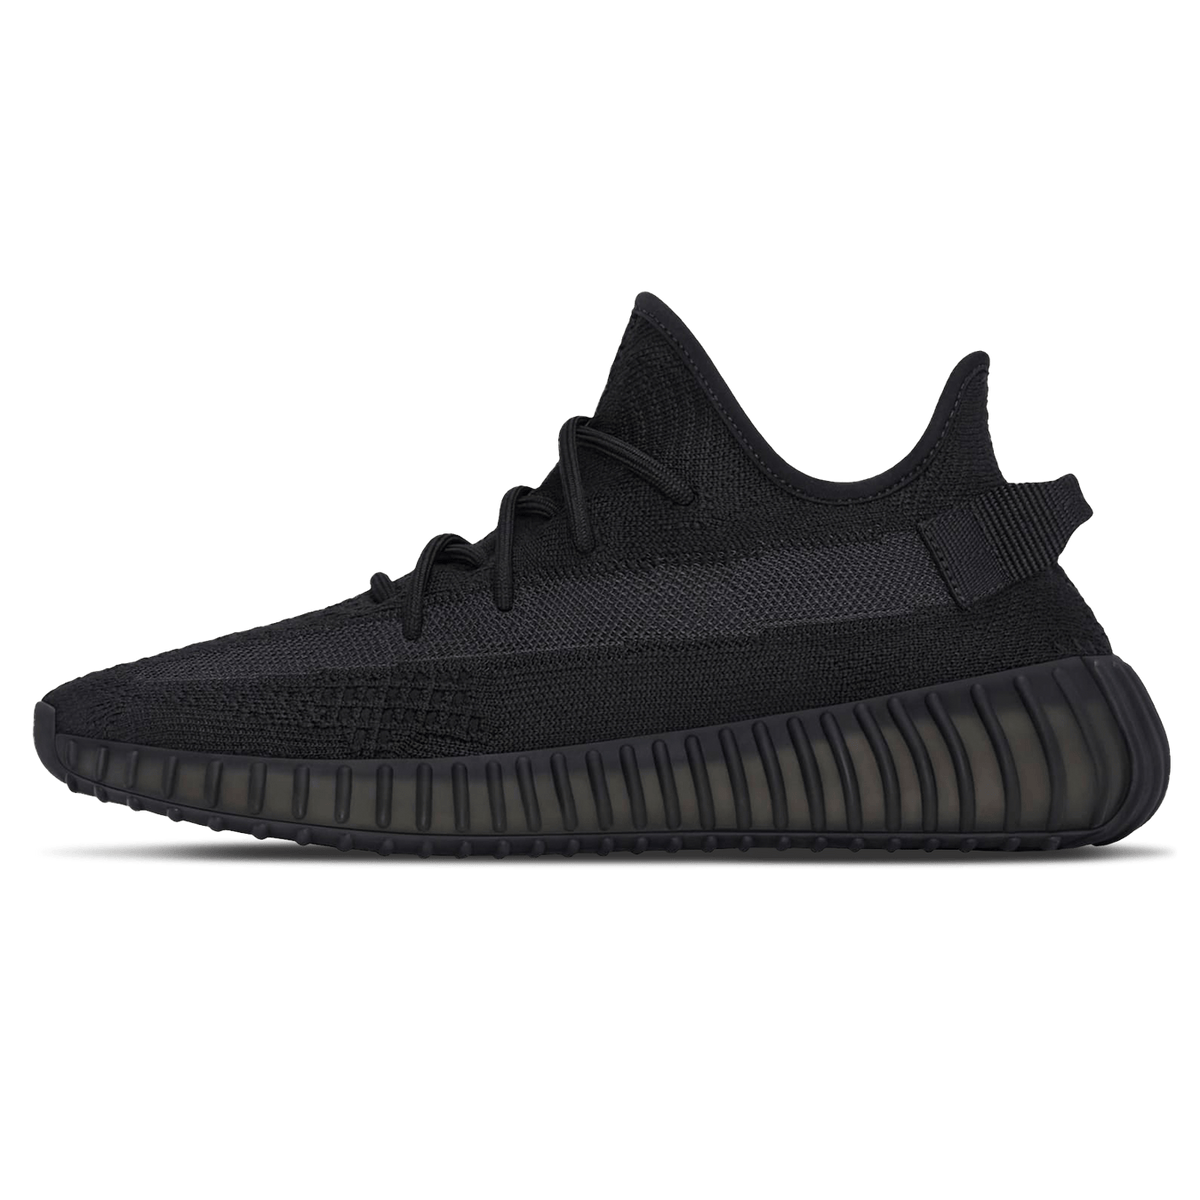 Images yeezy boost 350 v2 onyx HQ4540 1